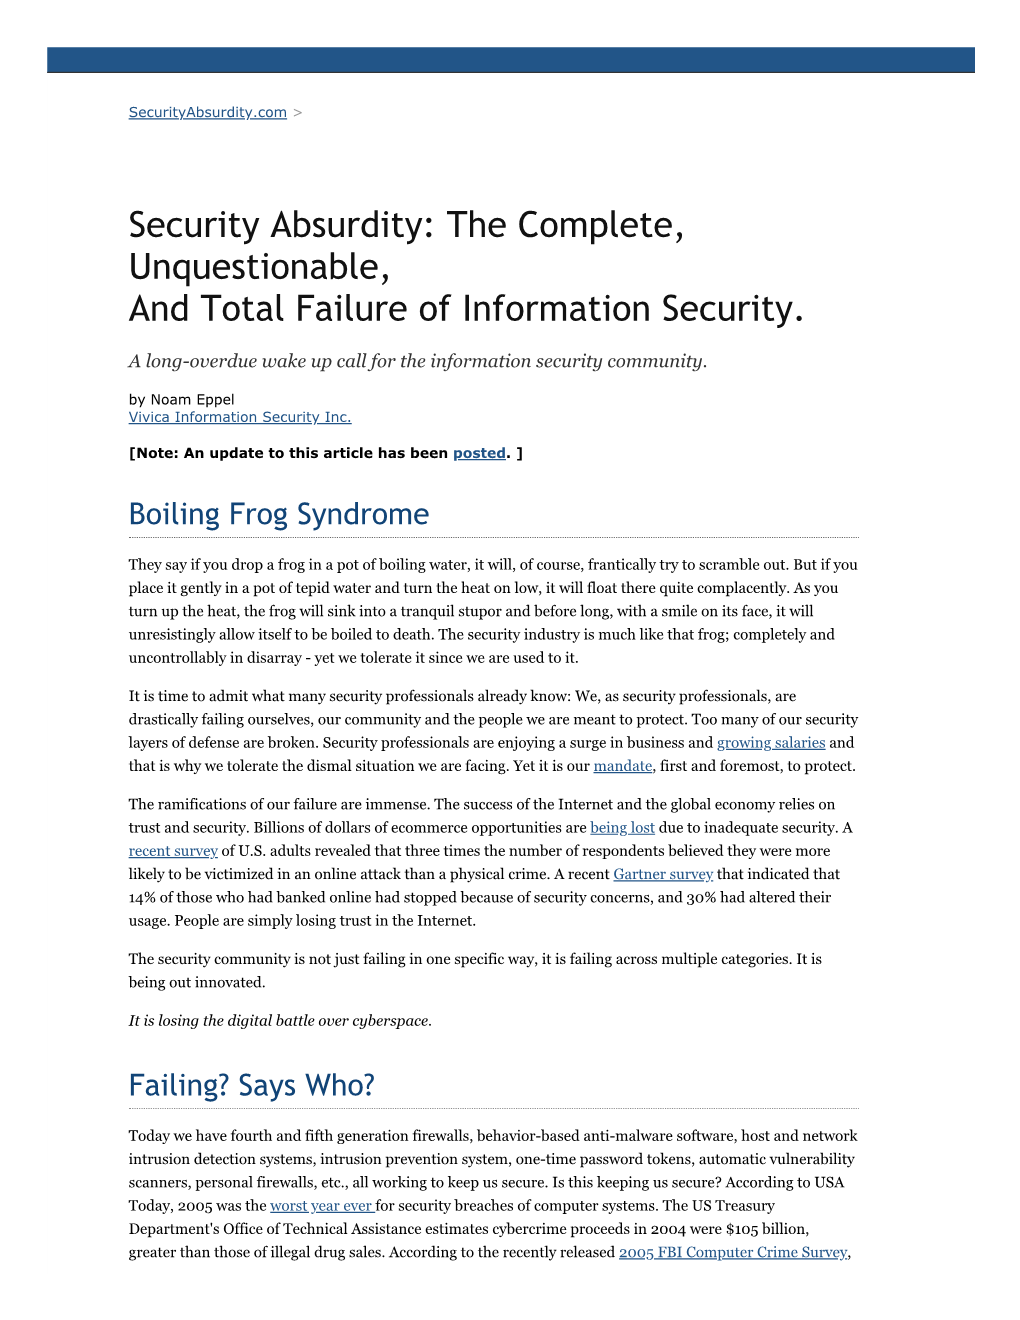 Security Absurdity: the Complete, Unquestionable, and Total Failure of Information Security